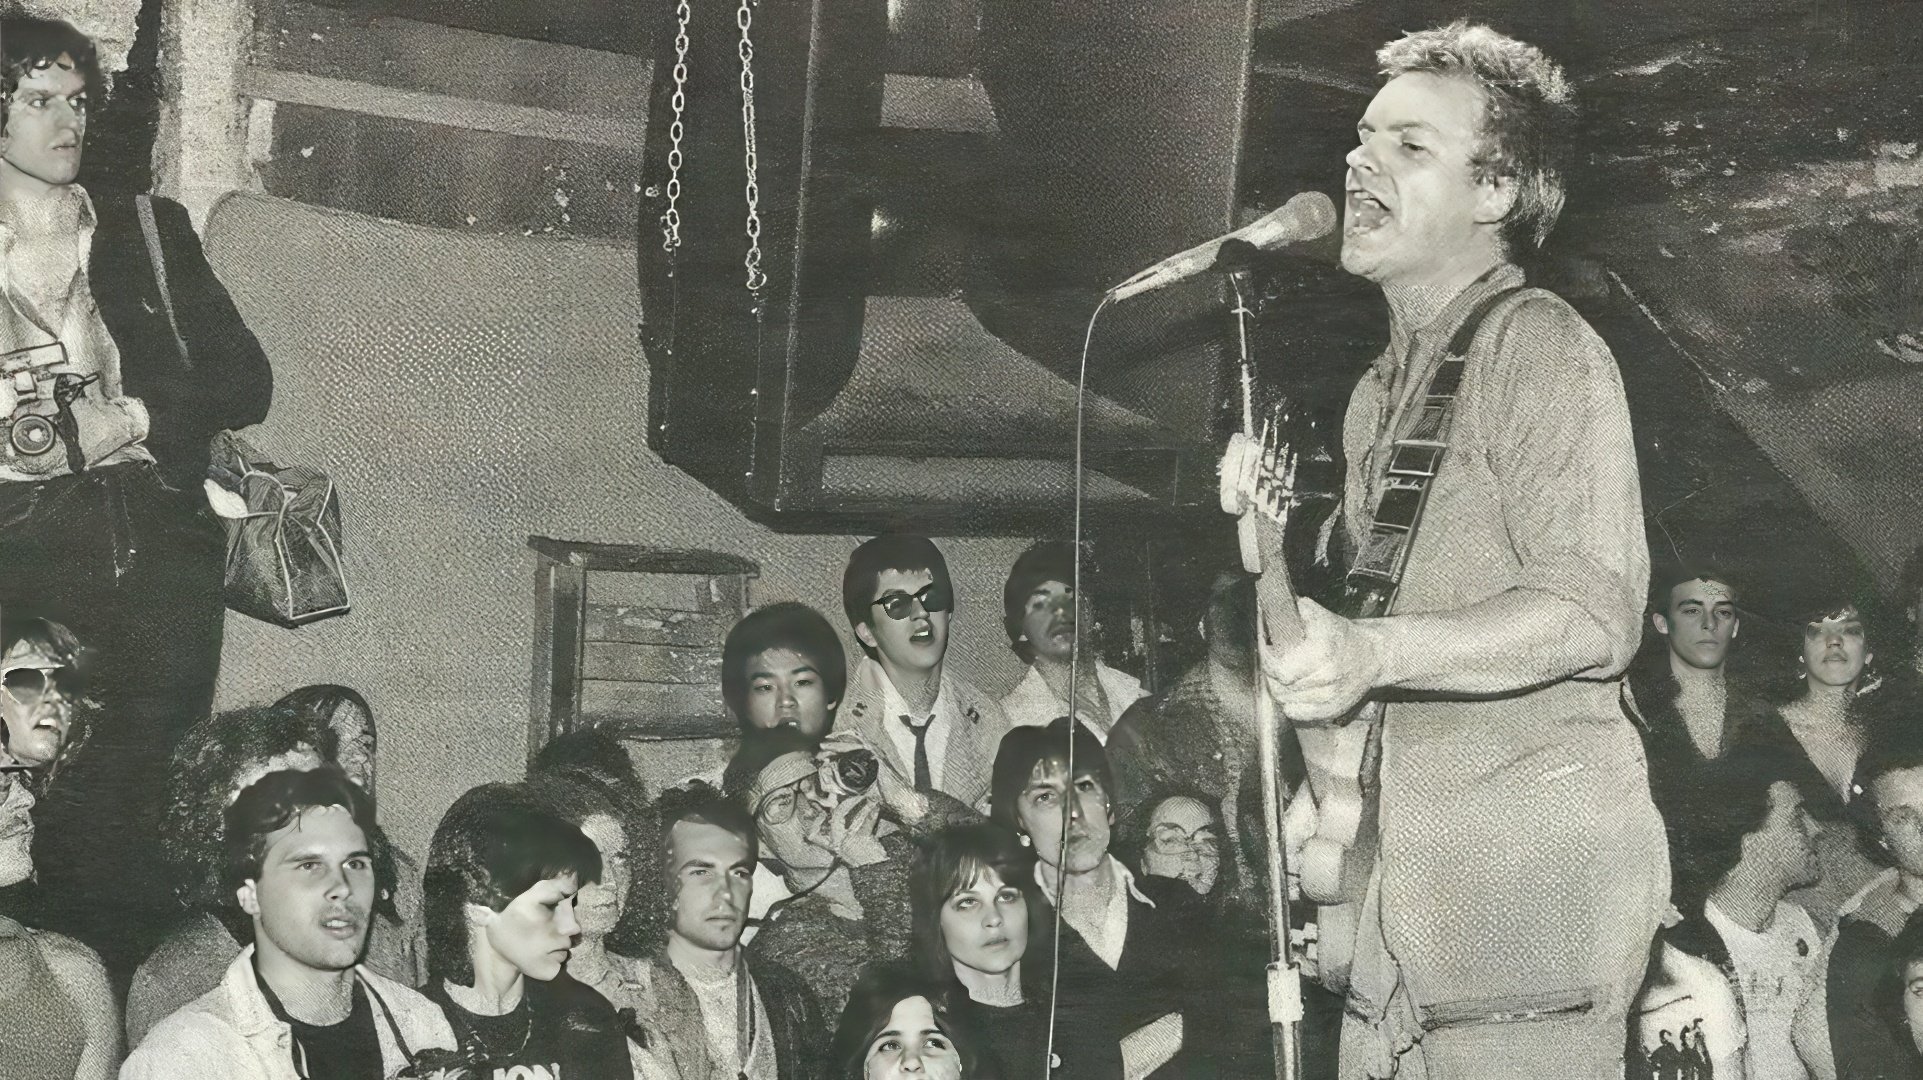 The Police performing at CBGB